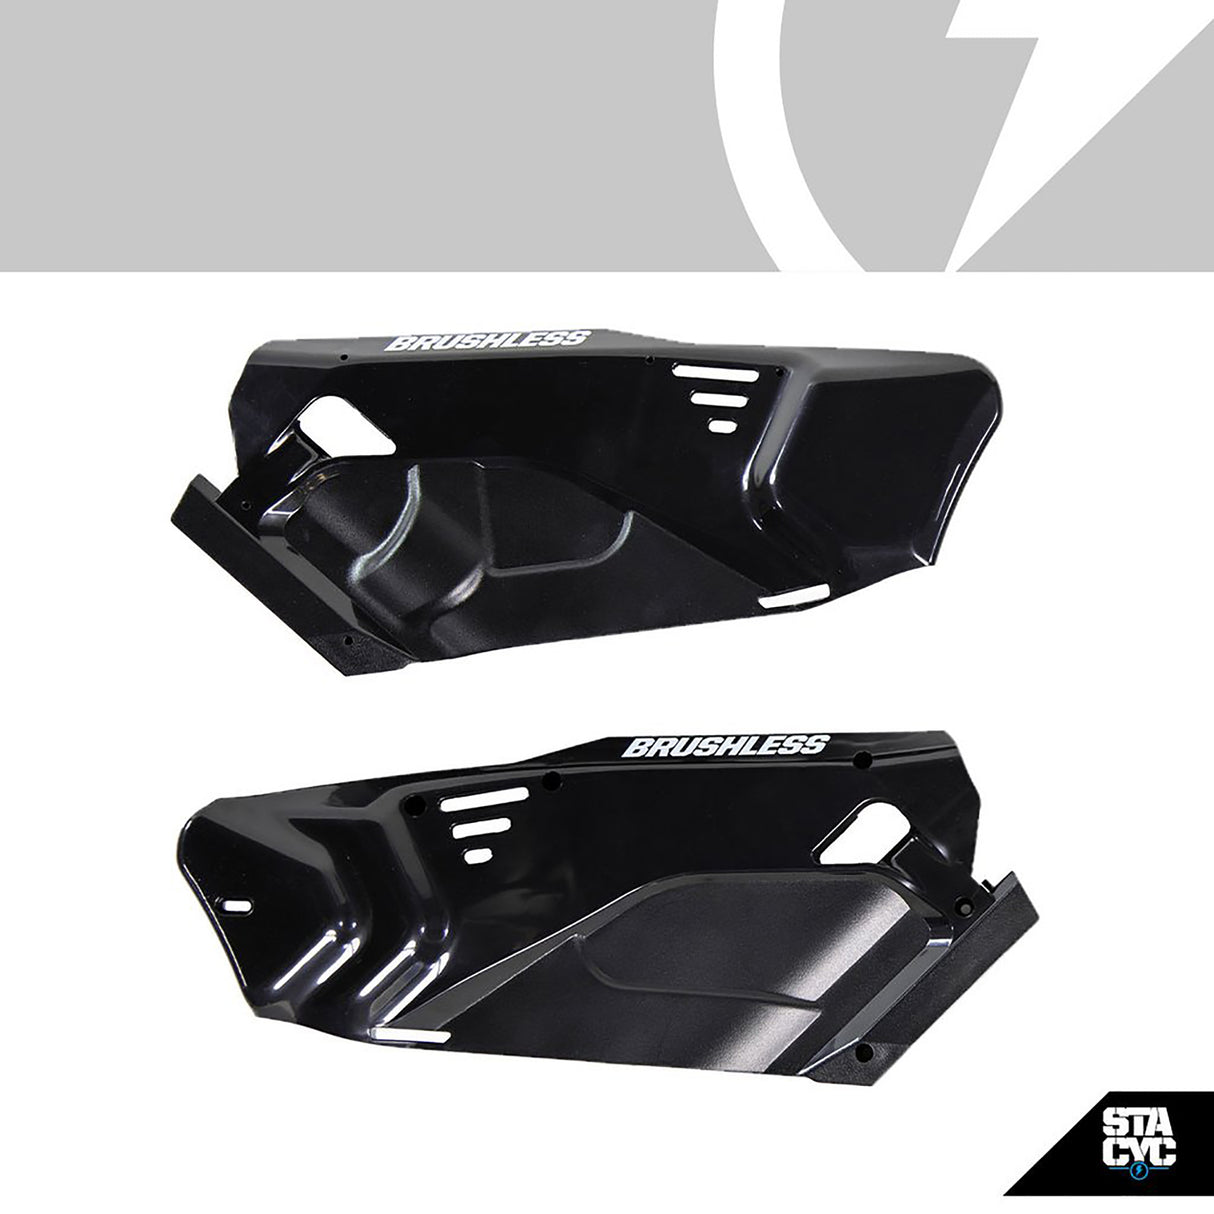 STACYC REPLACEMENT VENTED SIDE PANEL KIT